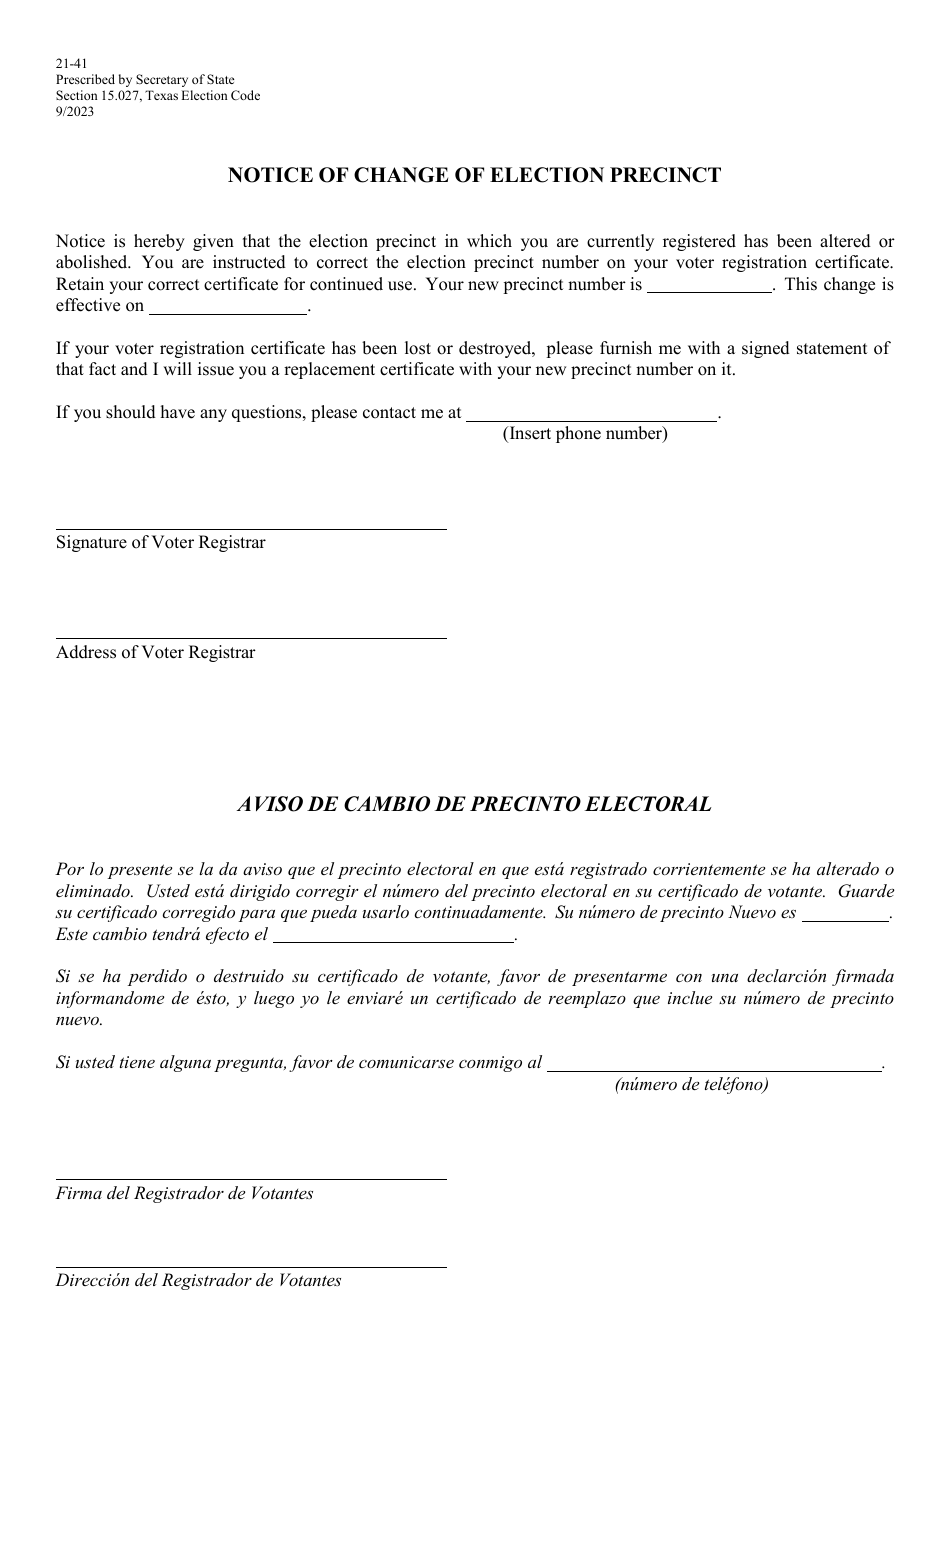 Form 21-41 Notice of Change of Election Precinct - Texas (English / Spanish), Page 1